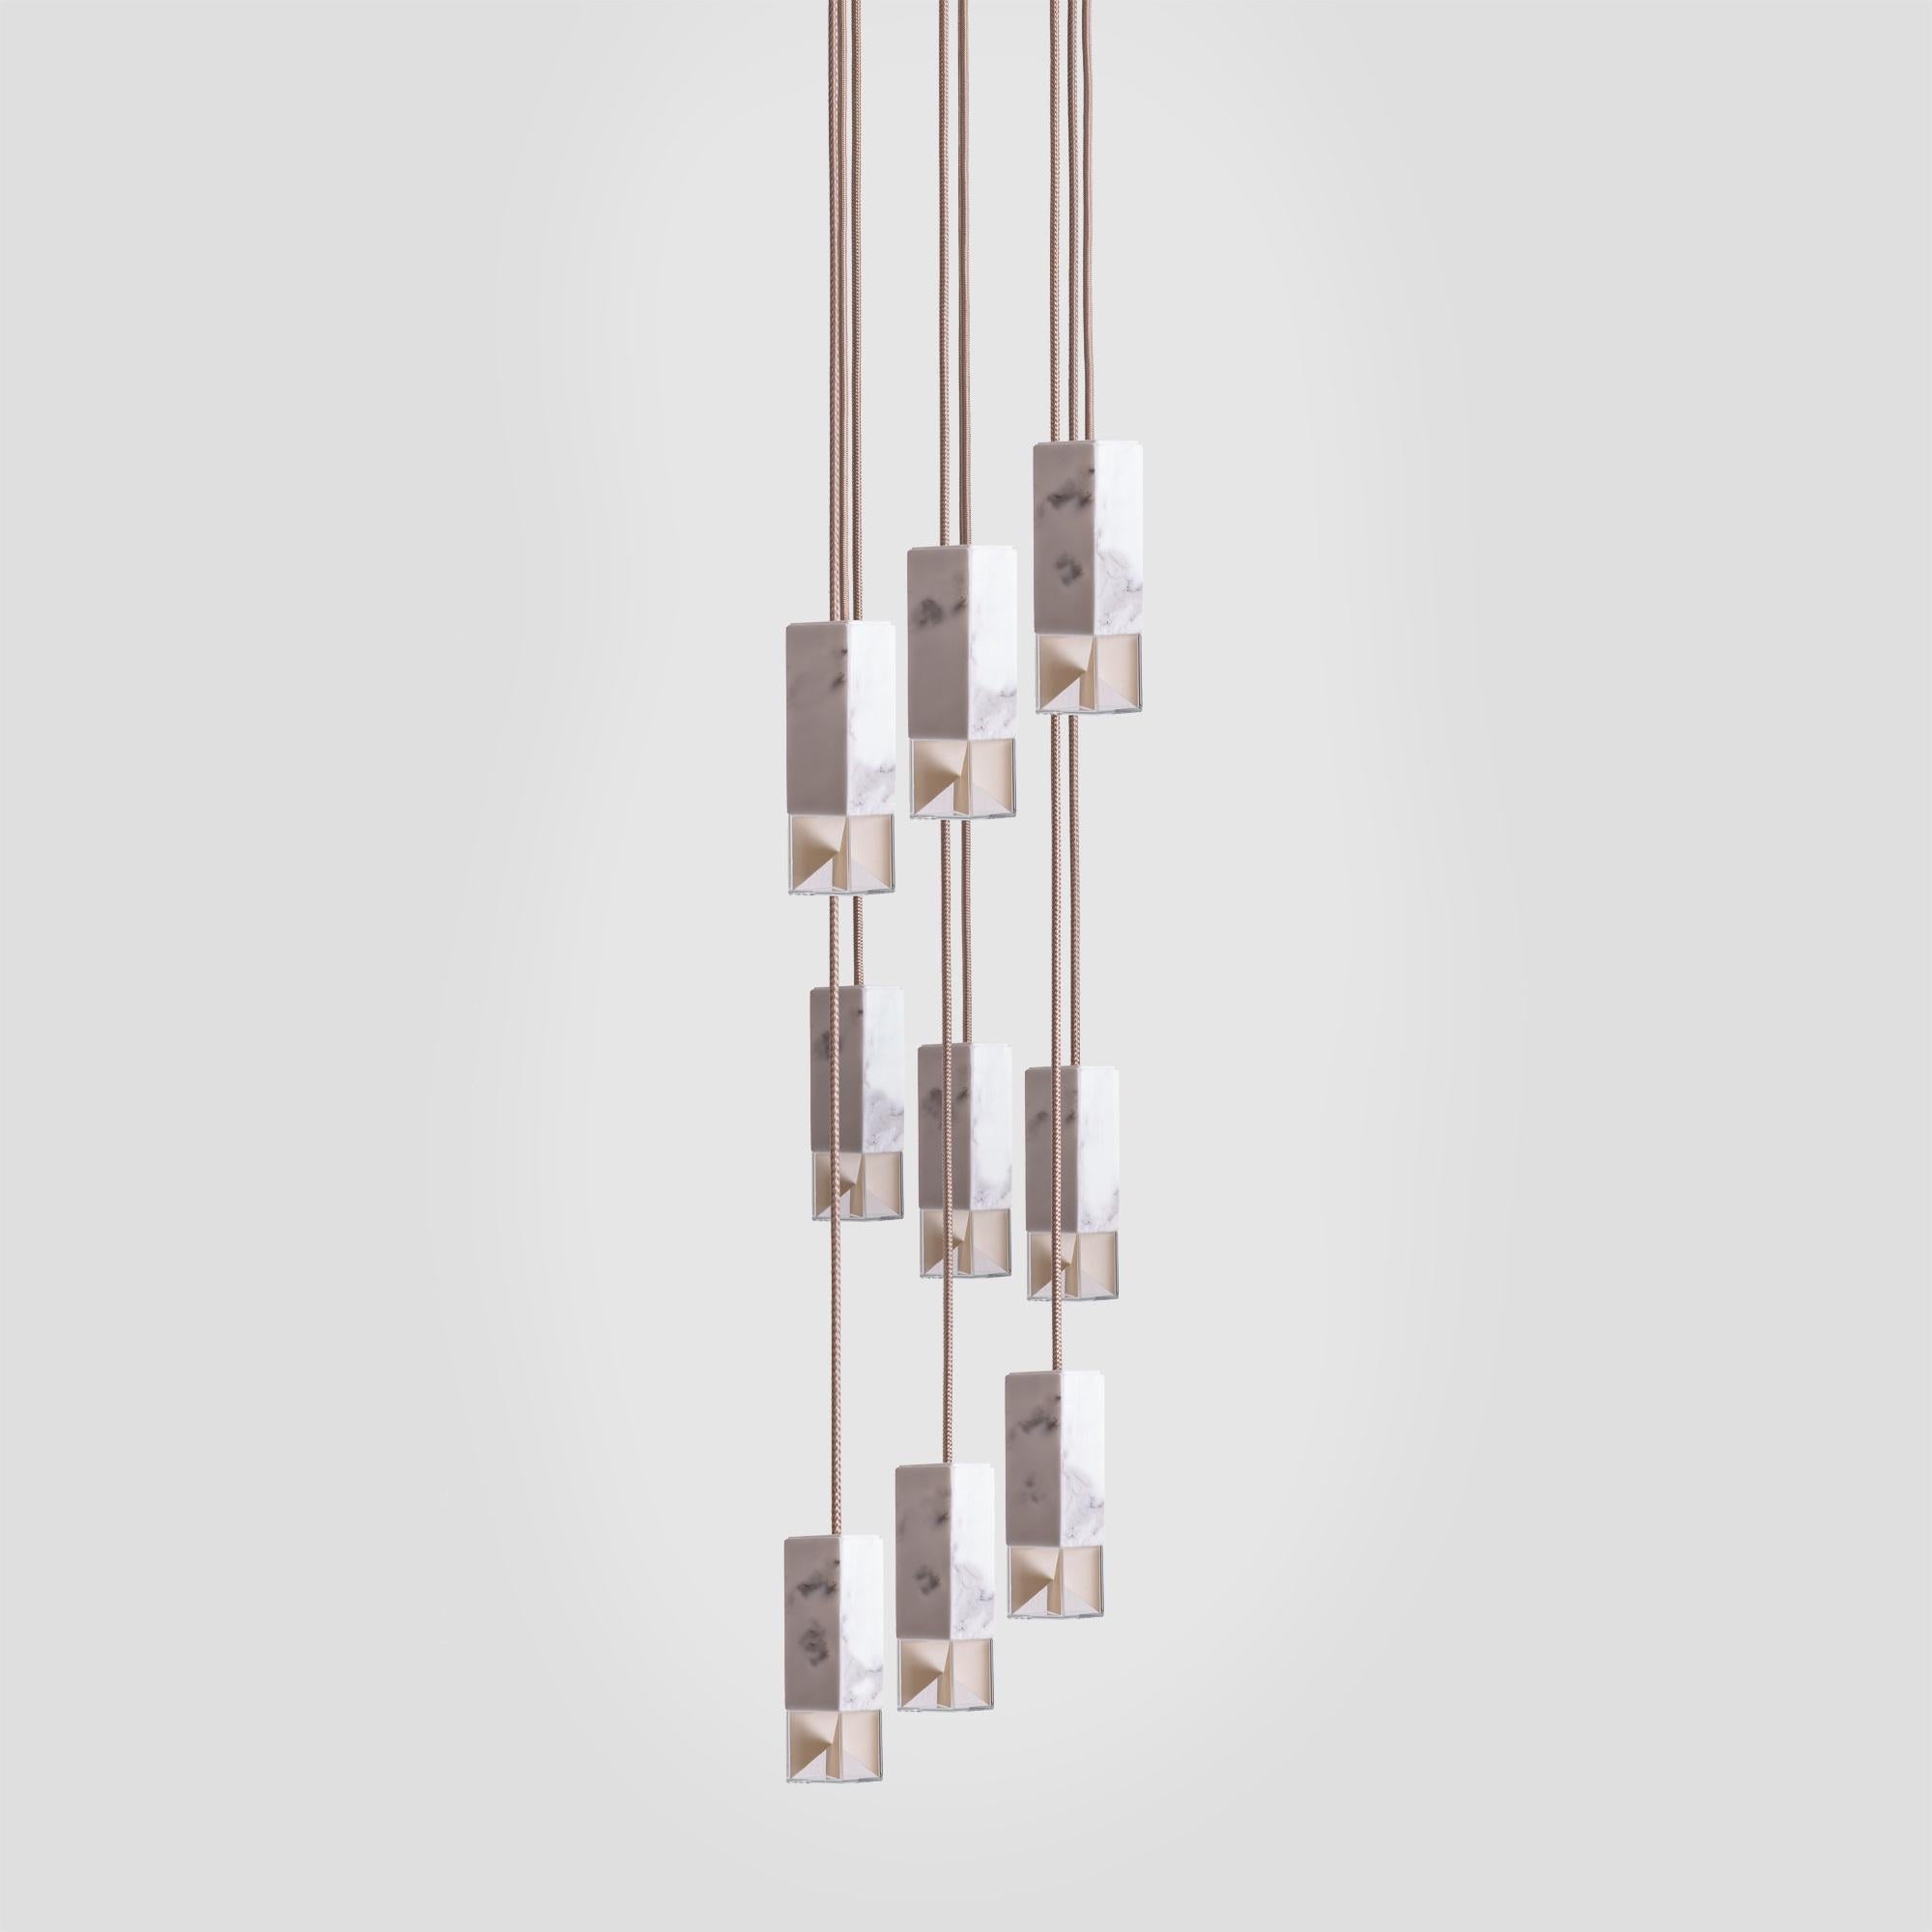 Inspired by midcentury designs, this superb chandelier is a statement piece that will add an elegant accent in a high-ceiling dining room or foyer. This piece showcases an architectural Silhouette composed of nine rectangular shades suspended at